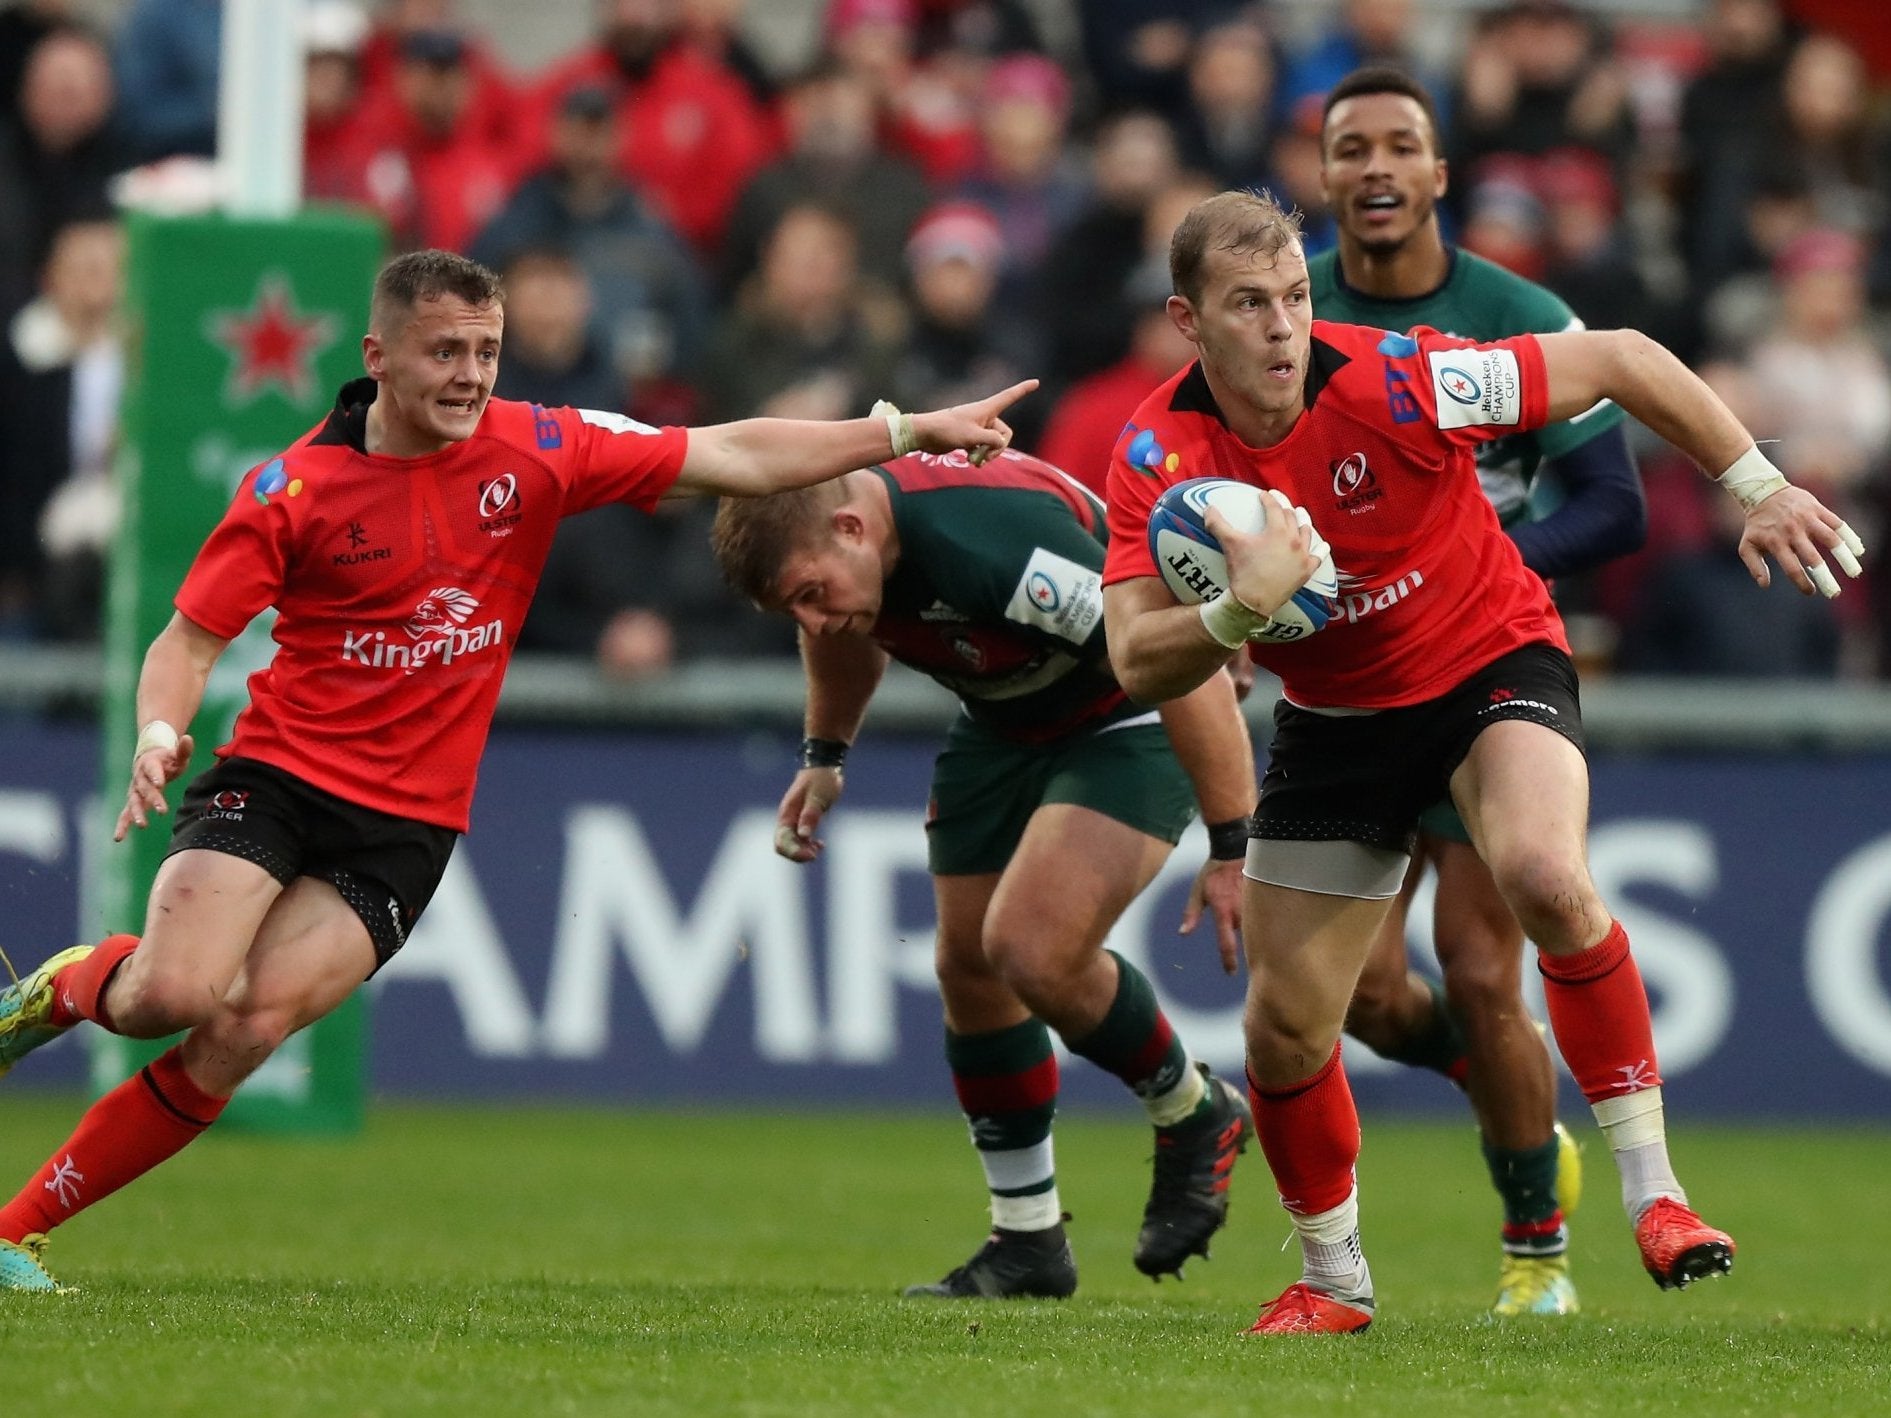 Ulster's Champions Cup campaign has got off to a winning start